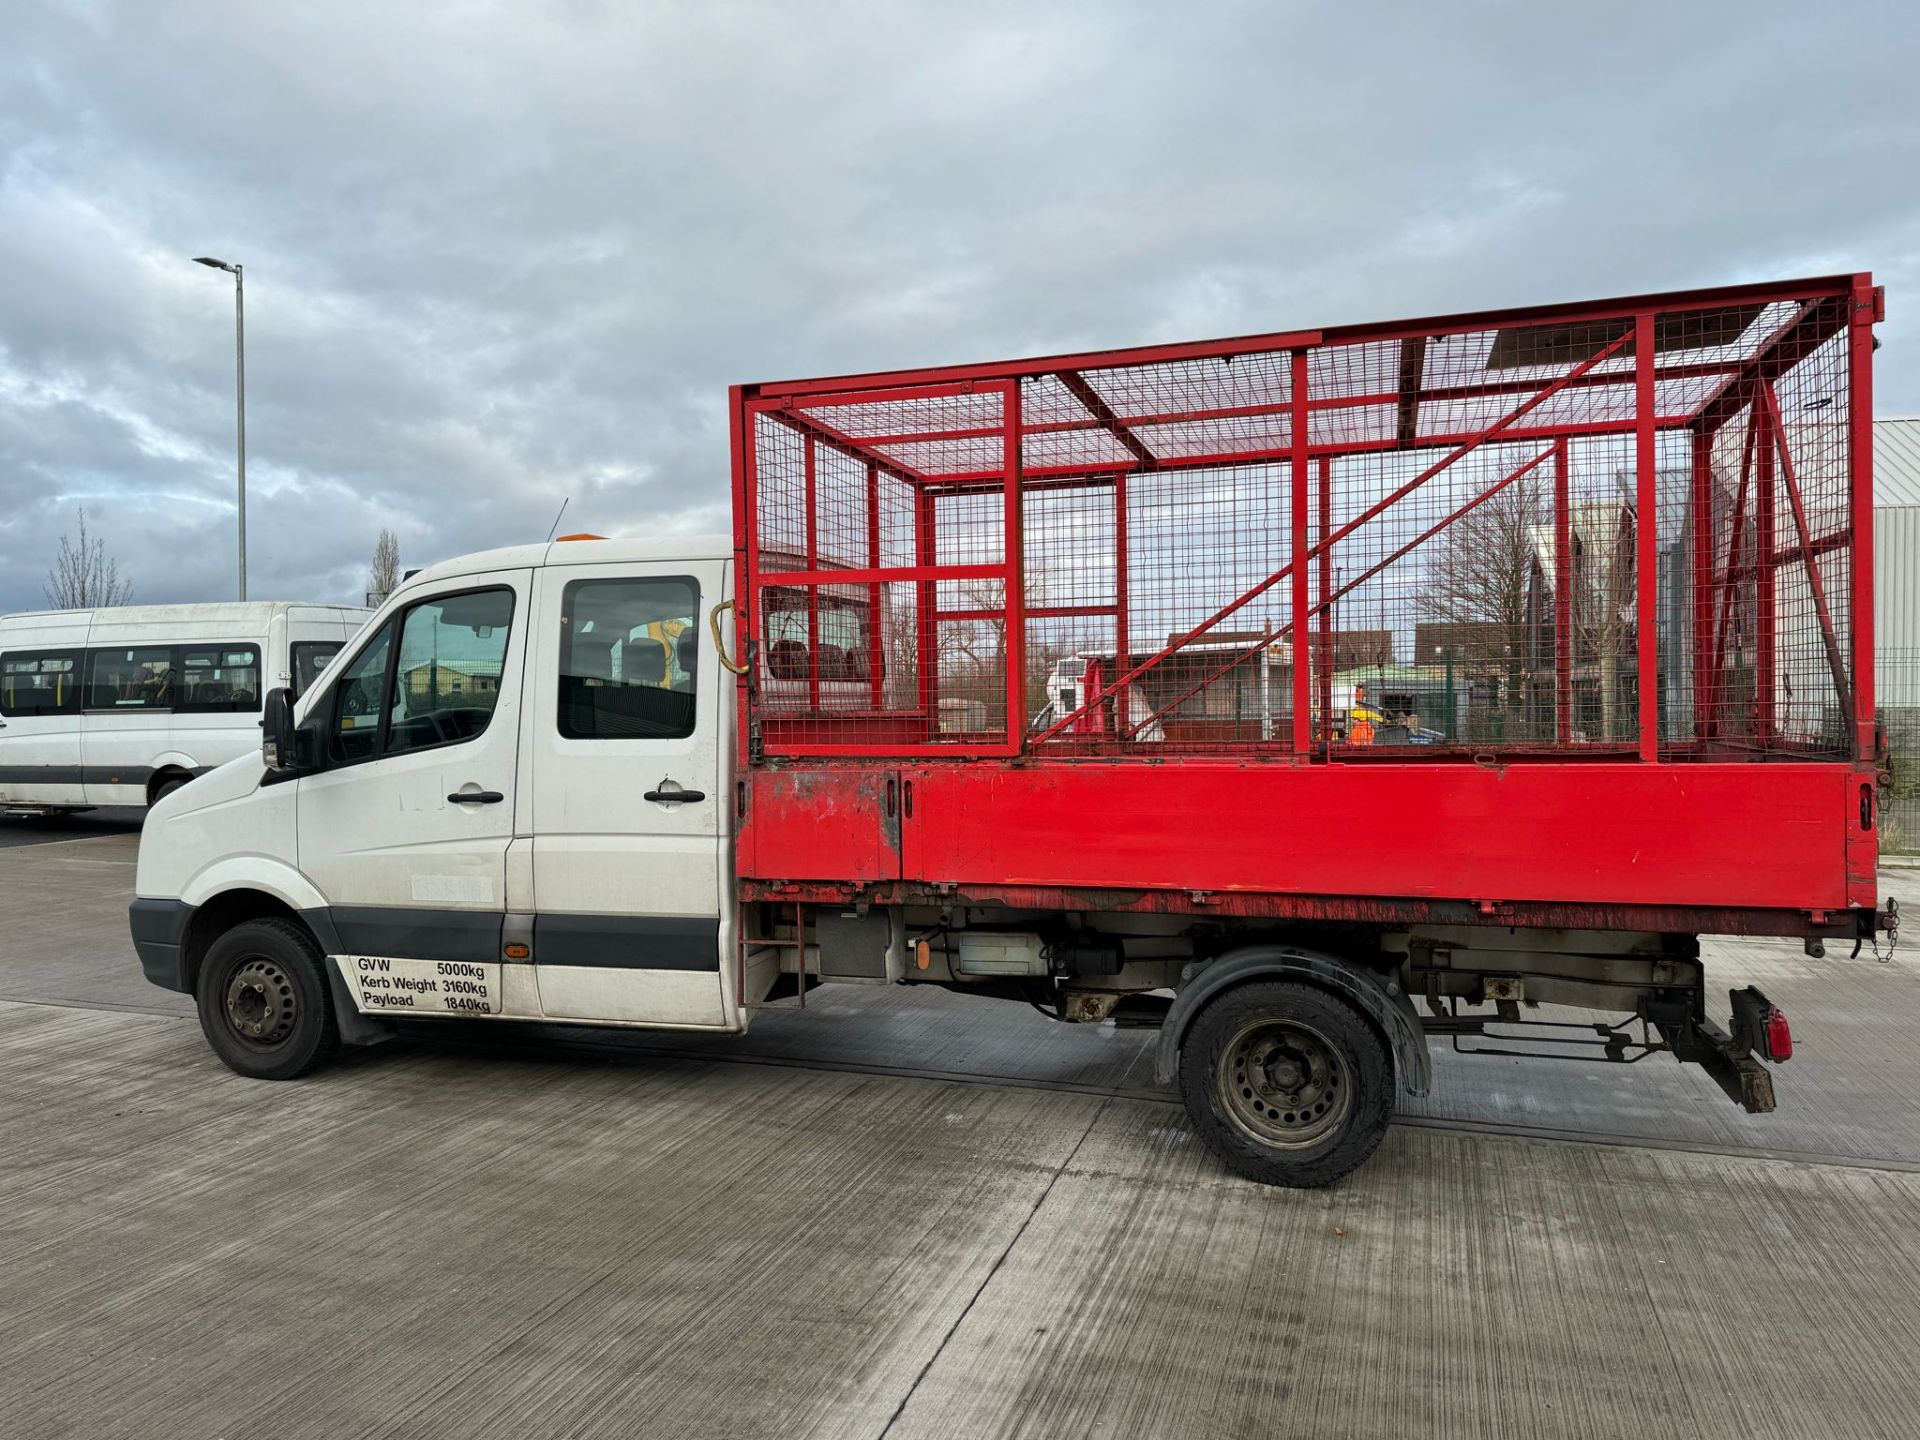 2013 - Volkswagen Crafter, Caged Tipper (Ex-Council Owned & Maintained) - Image 15 of 25